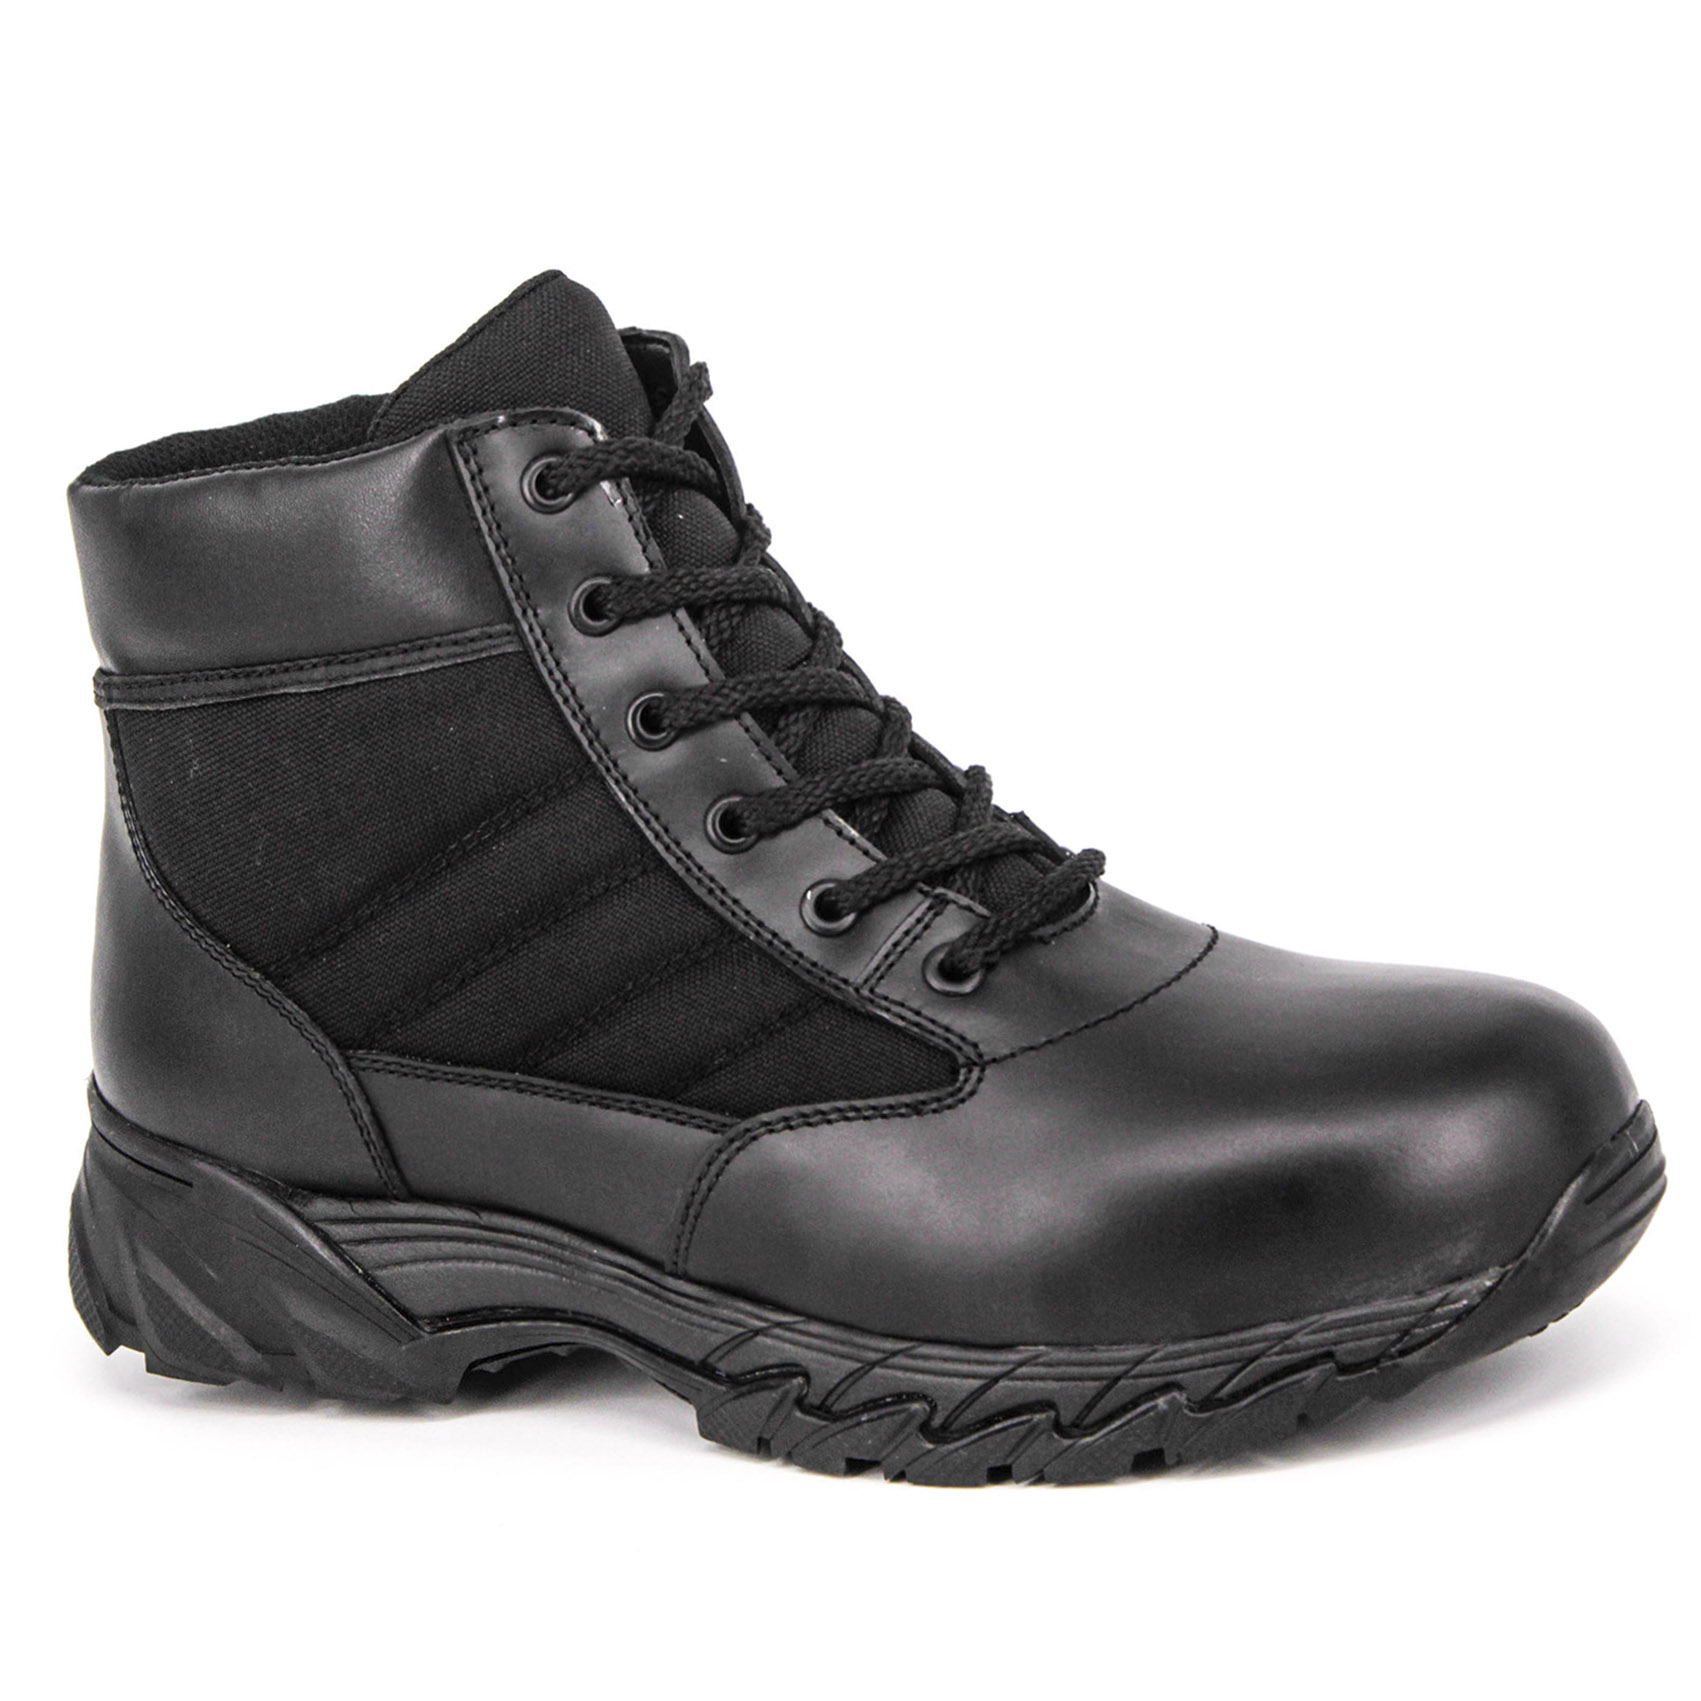 MILFORCE High quality nylon canvas military boots tactical combat boot